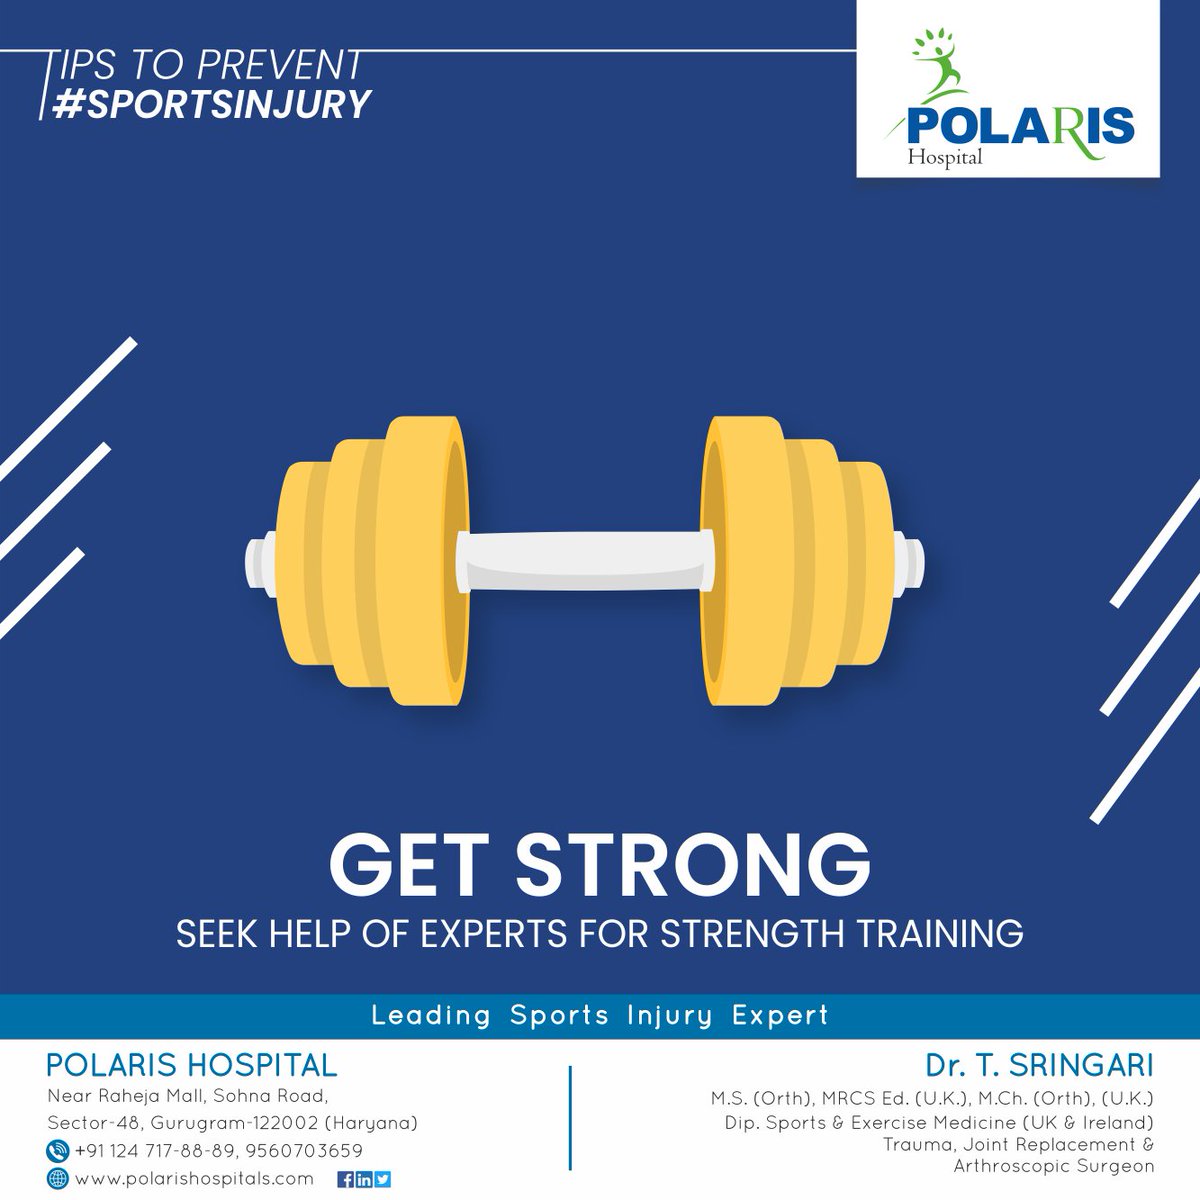 All sports have a risk of injury. Fortunately, the benefits of sports participation outweigh the risks.
To reduce the risk of #sports #injury, strengthen your muscles under expert's supervision.  #SportsInjuries #PolarisHospital #DrTSringari #strengthandstamina